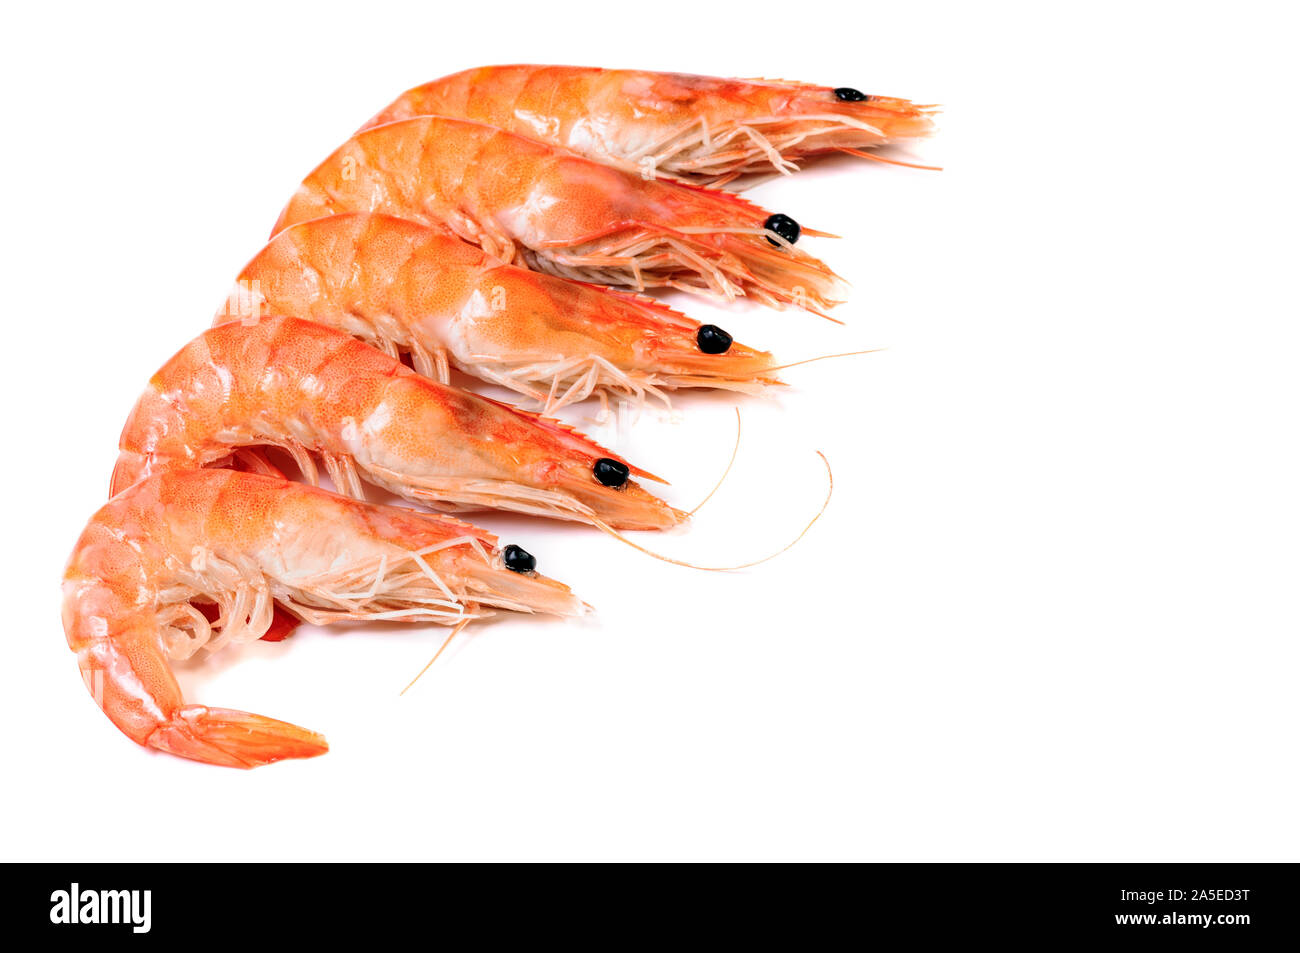 Five cooked shrimps arranged in a row isolated on white background Stock Photo